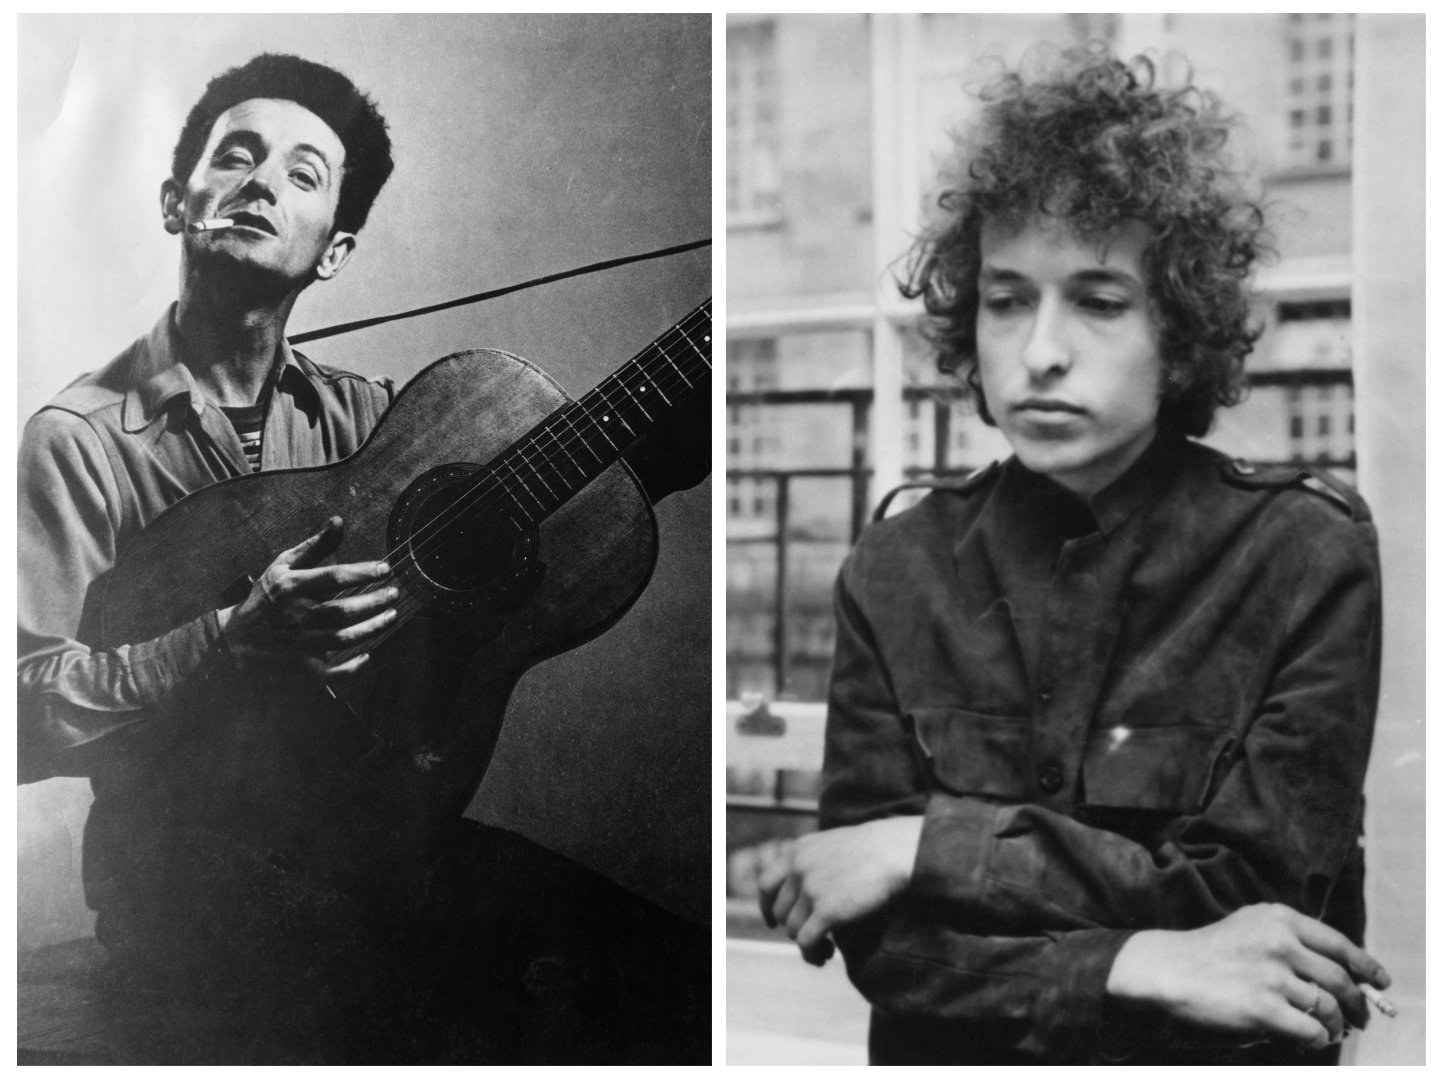 Bob Dylan Was 1 of the Few People Woody Guthrie’s Family Trusted to Meet Him